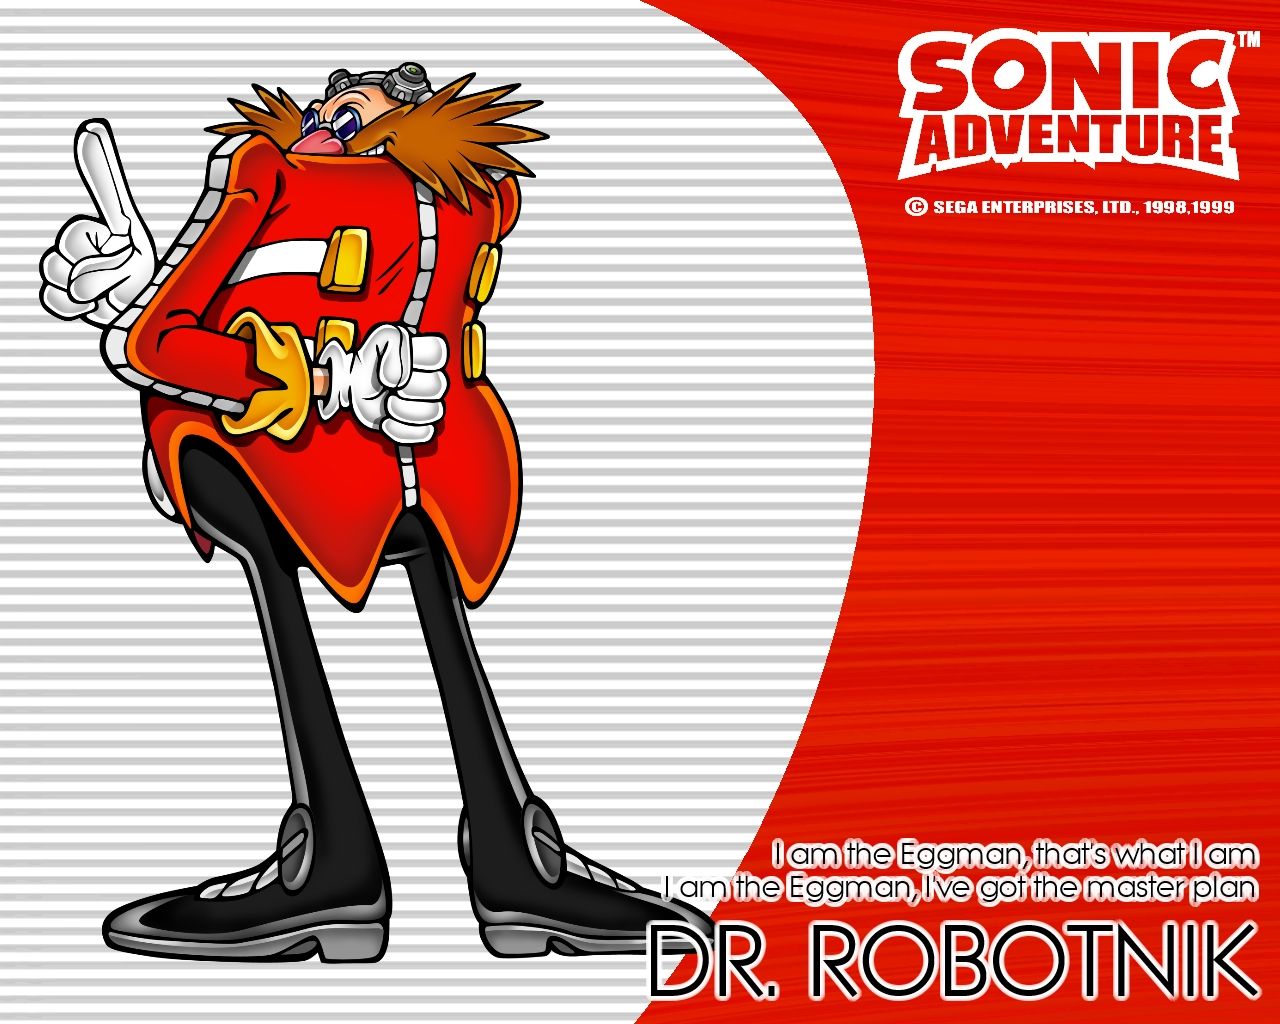 Bringing Dr. Eggman to the party